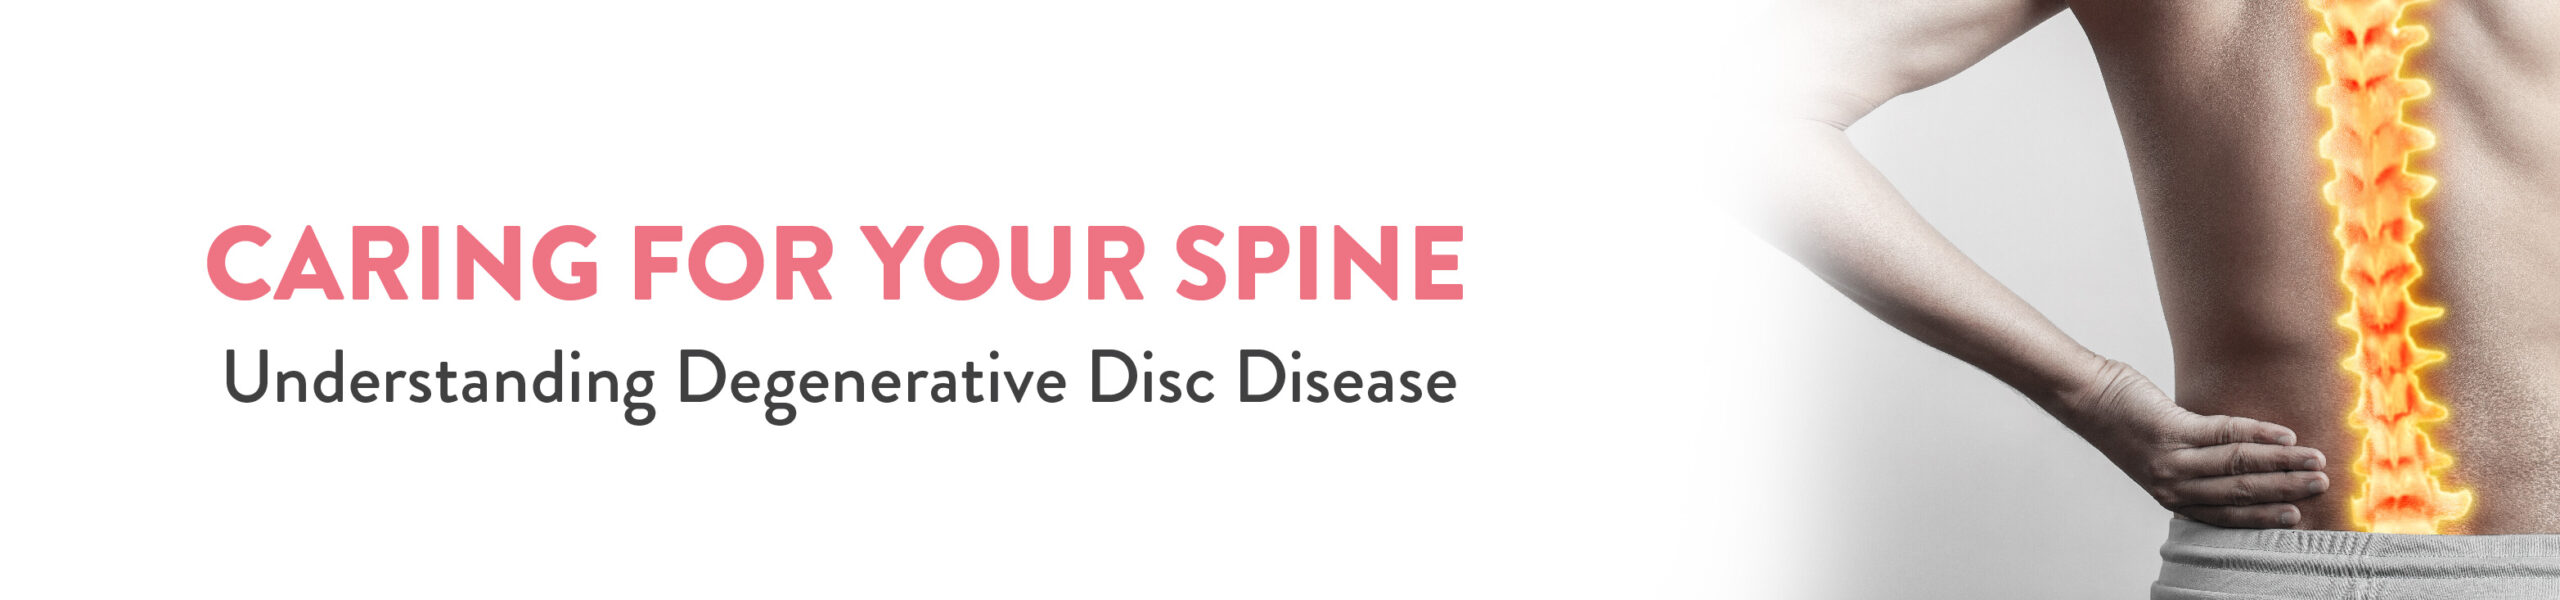 Caring your spine